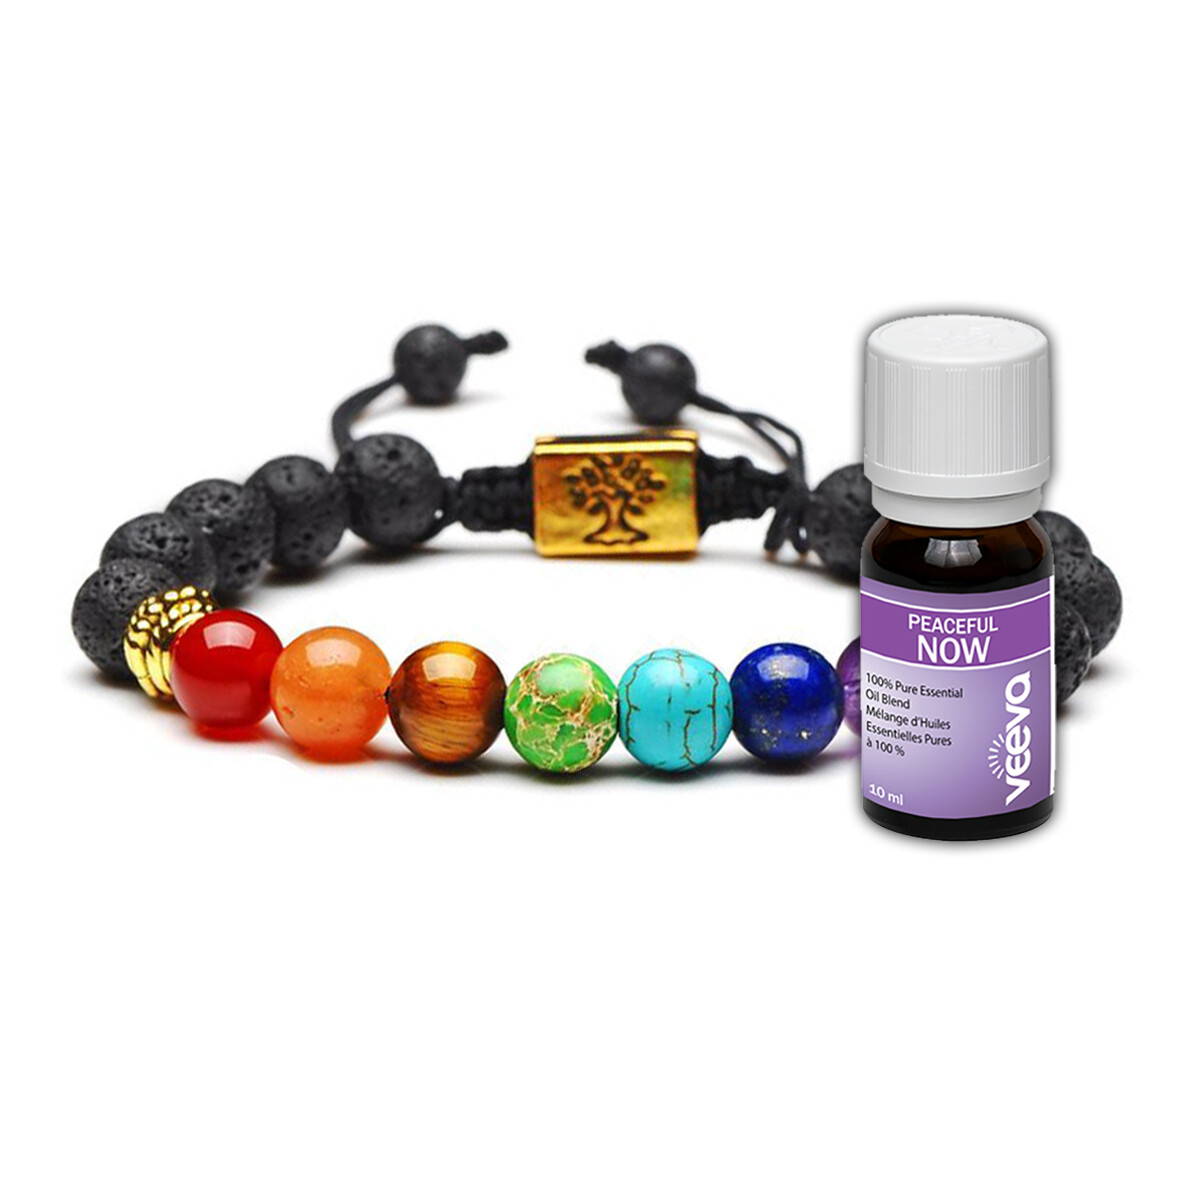 7 Chakra & Lava Stones Personal Aromatherapy Bracelet with Peaceful NOW Essential Oil Blend (2 models)